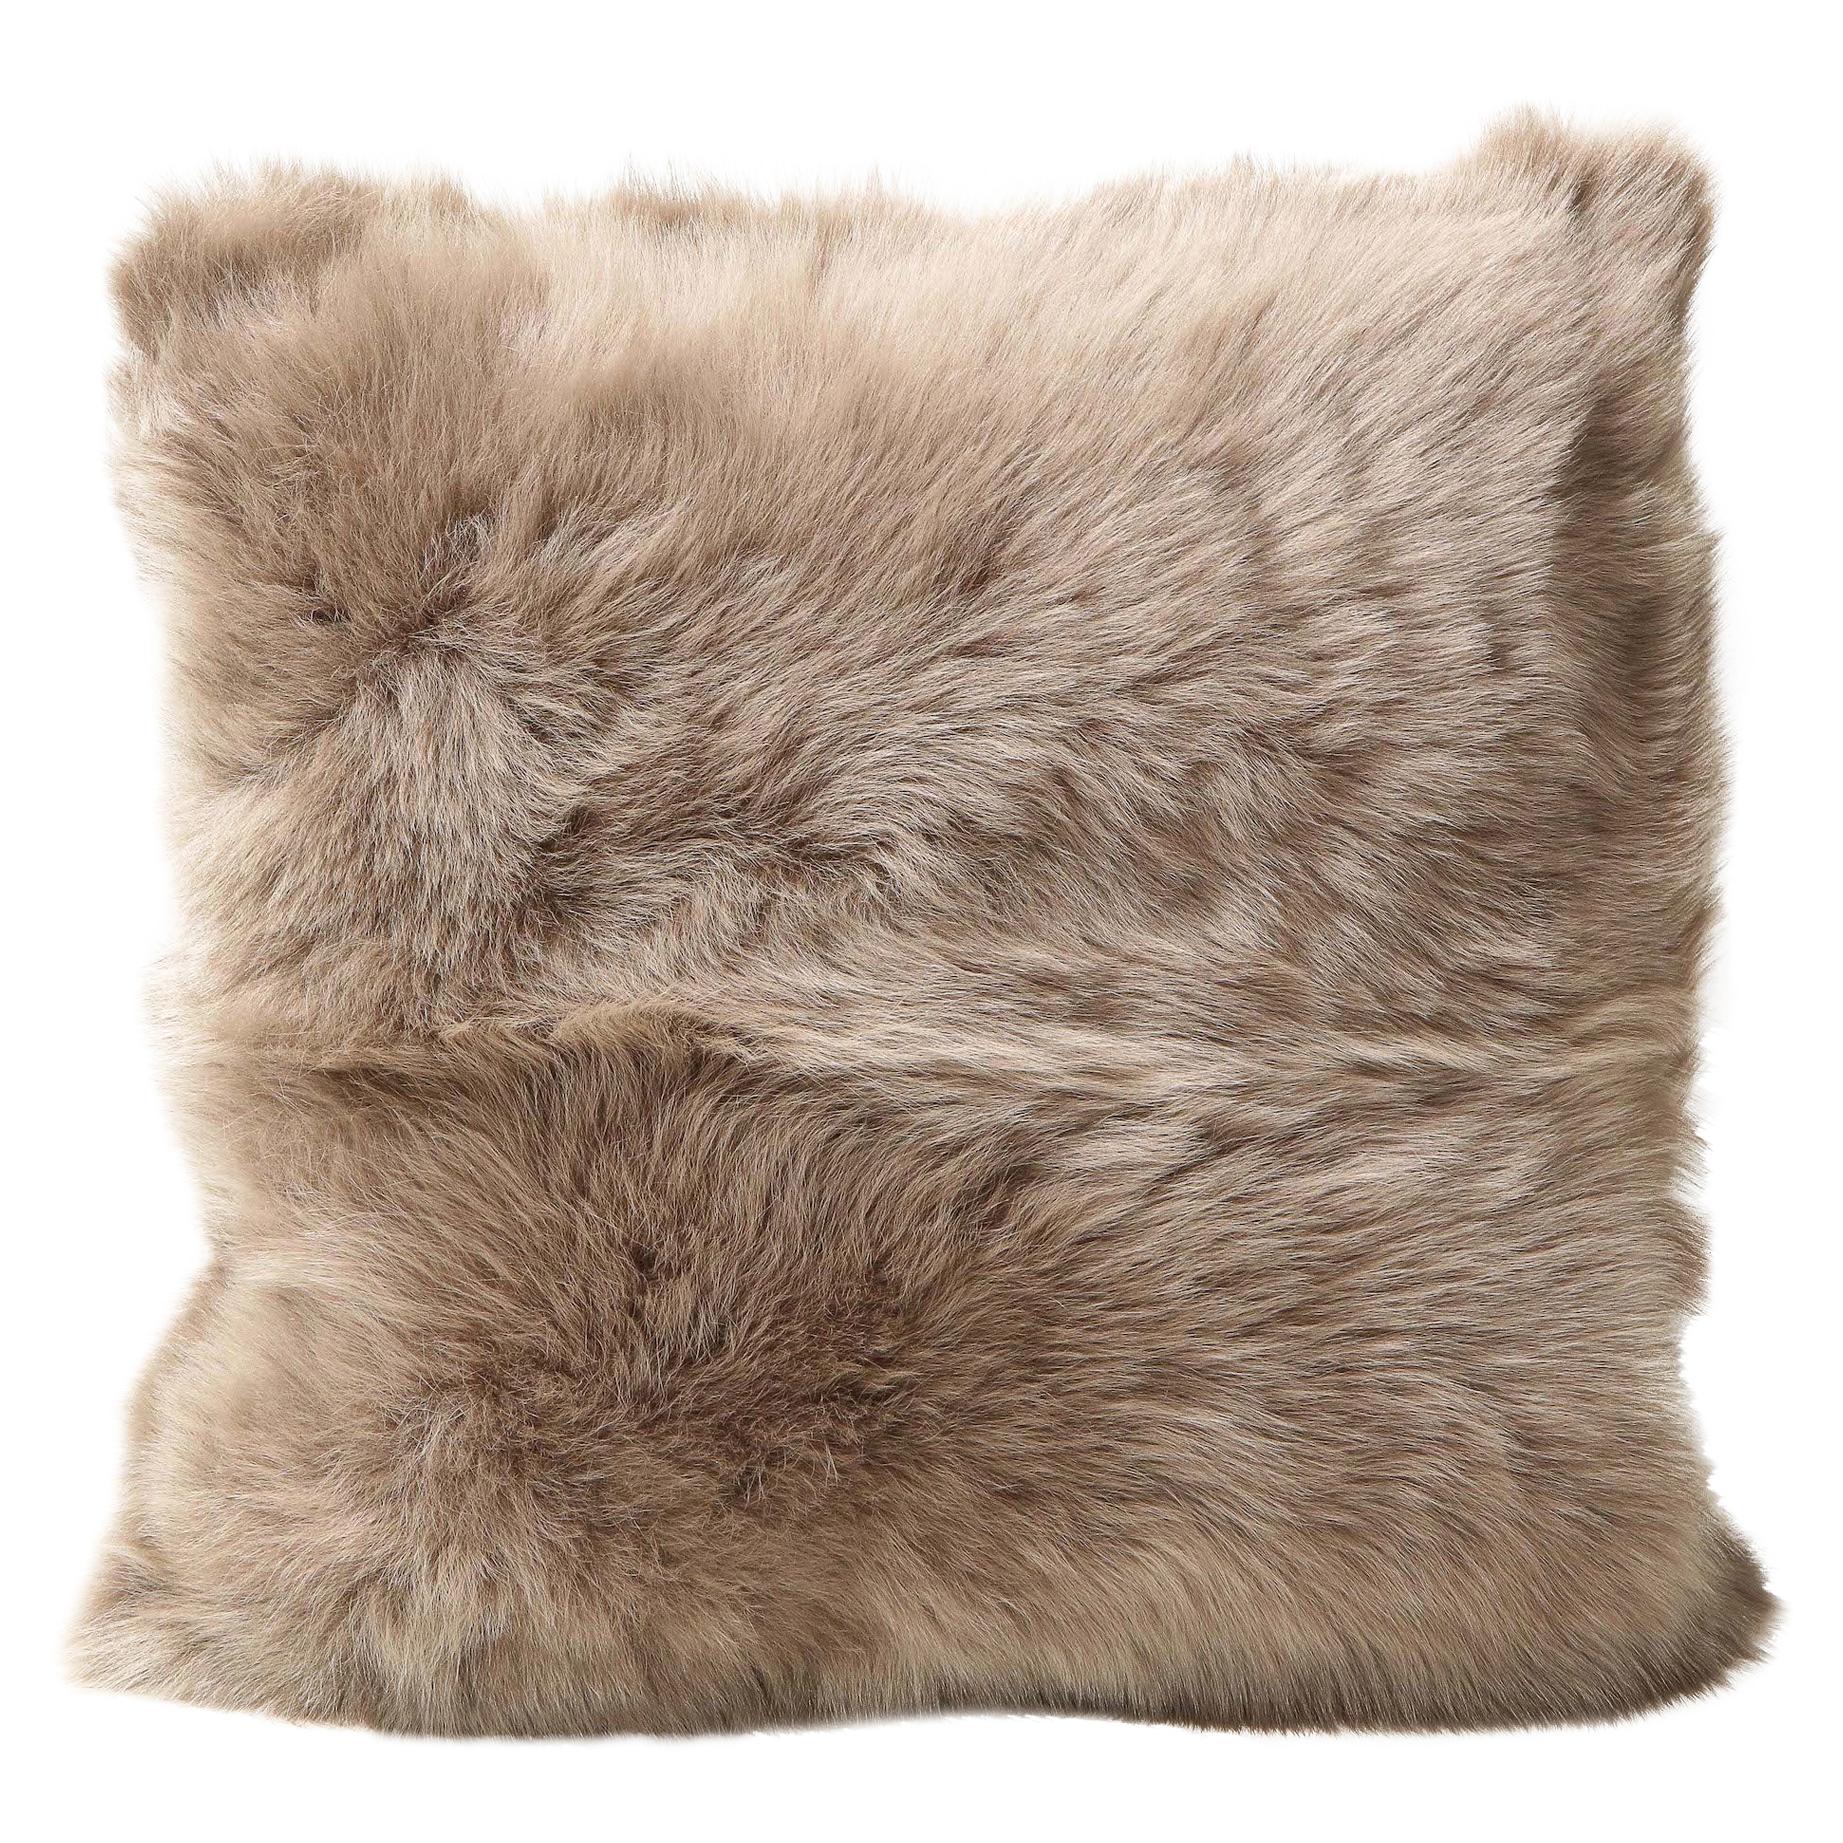 Double Sided Toscana Shearing Pillow in Taupe Color